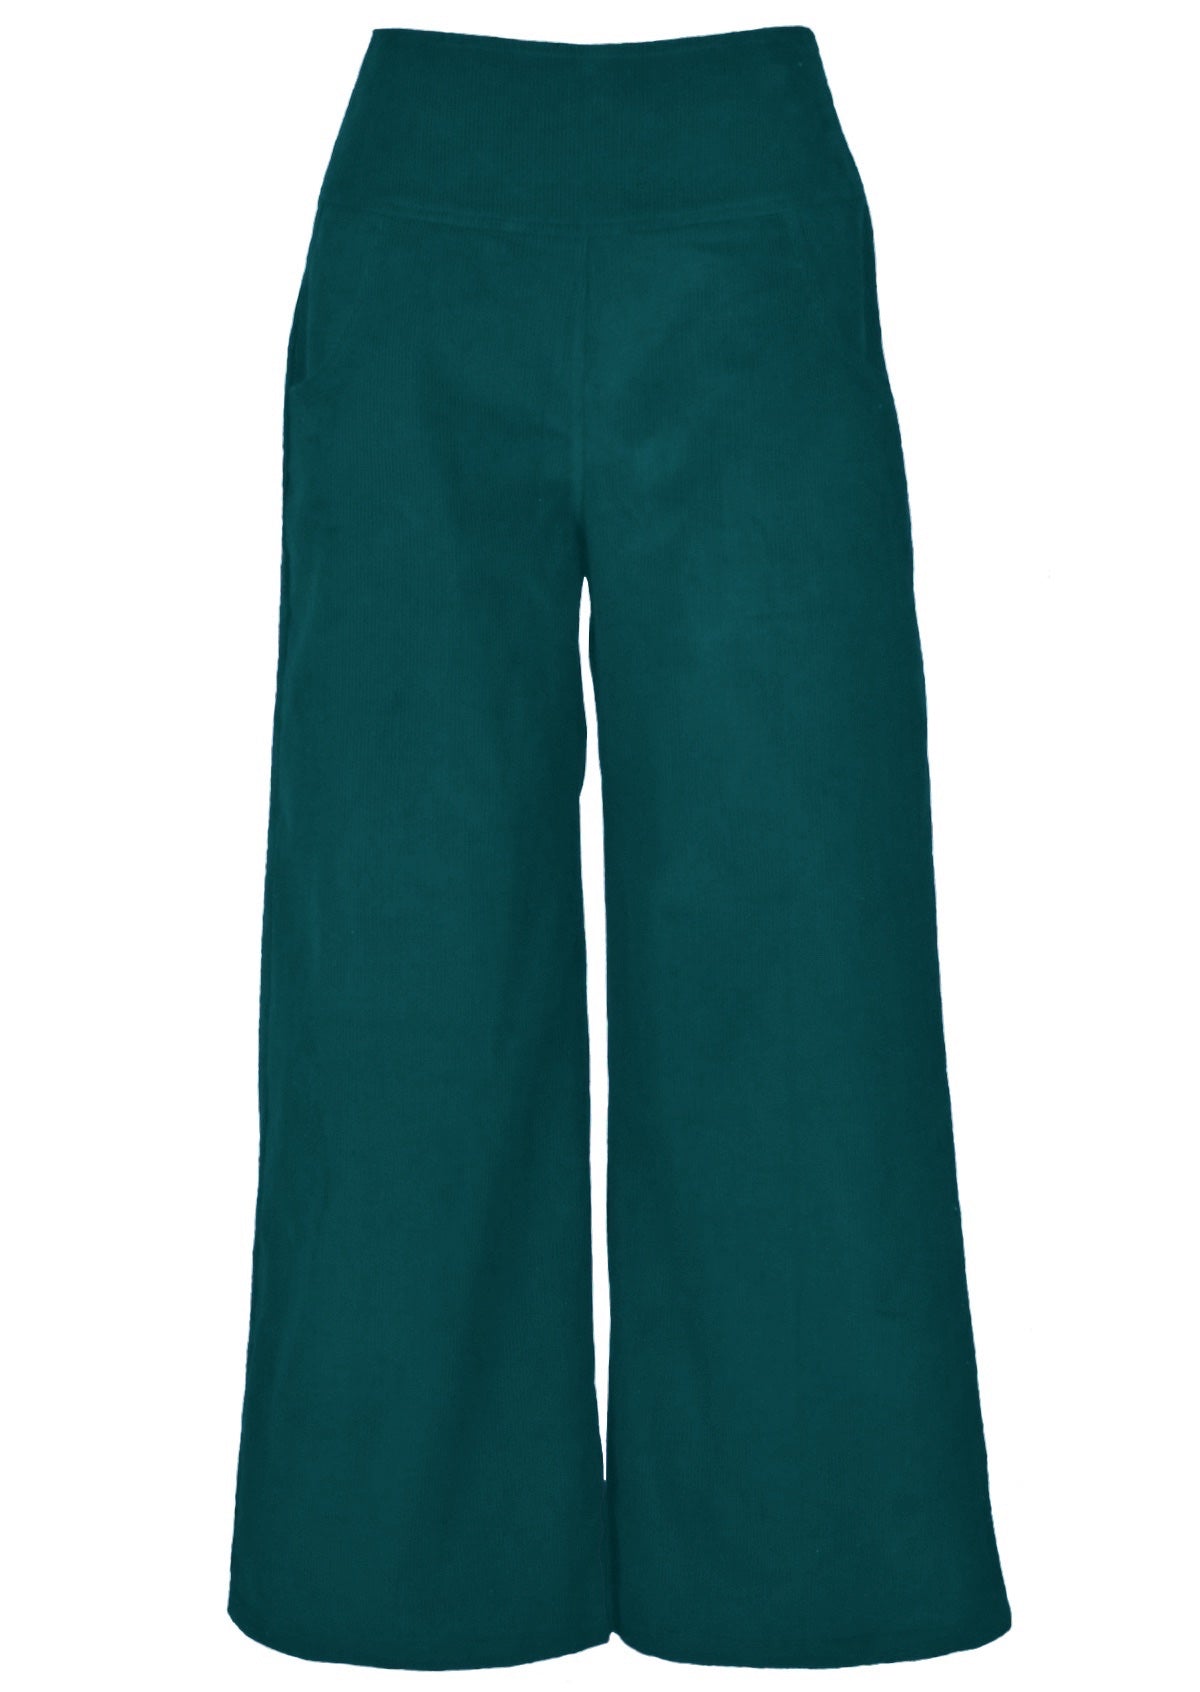 100% Cotton corduroy high waisted pants in deep teal.